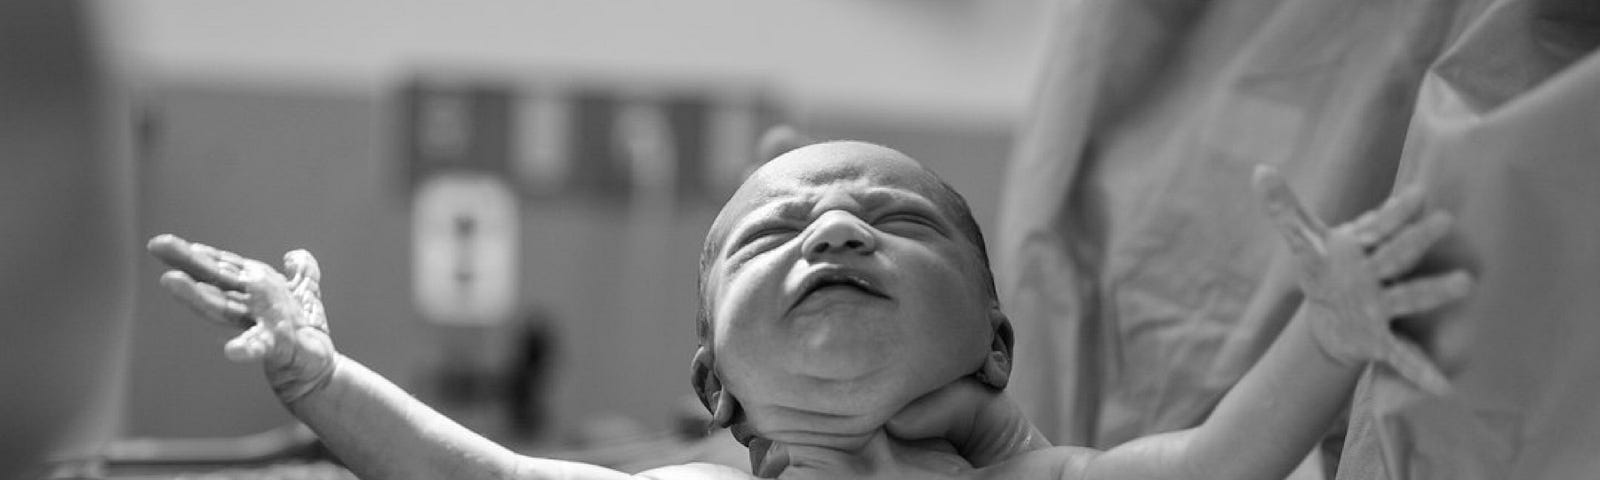 A black and white photo of a newborn baby, its arms open wide, being lifted in the delivery room immediately after birth. The baby is frowning and about to start crying.